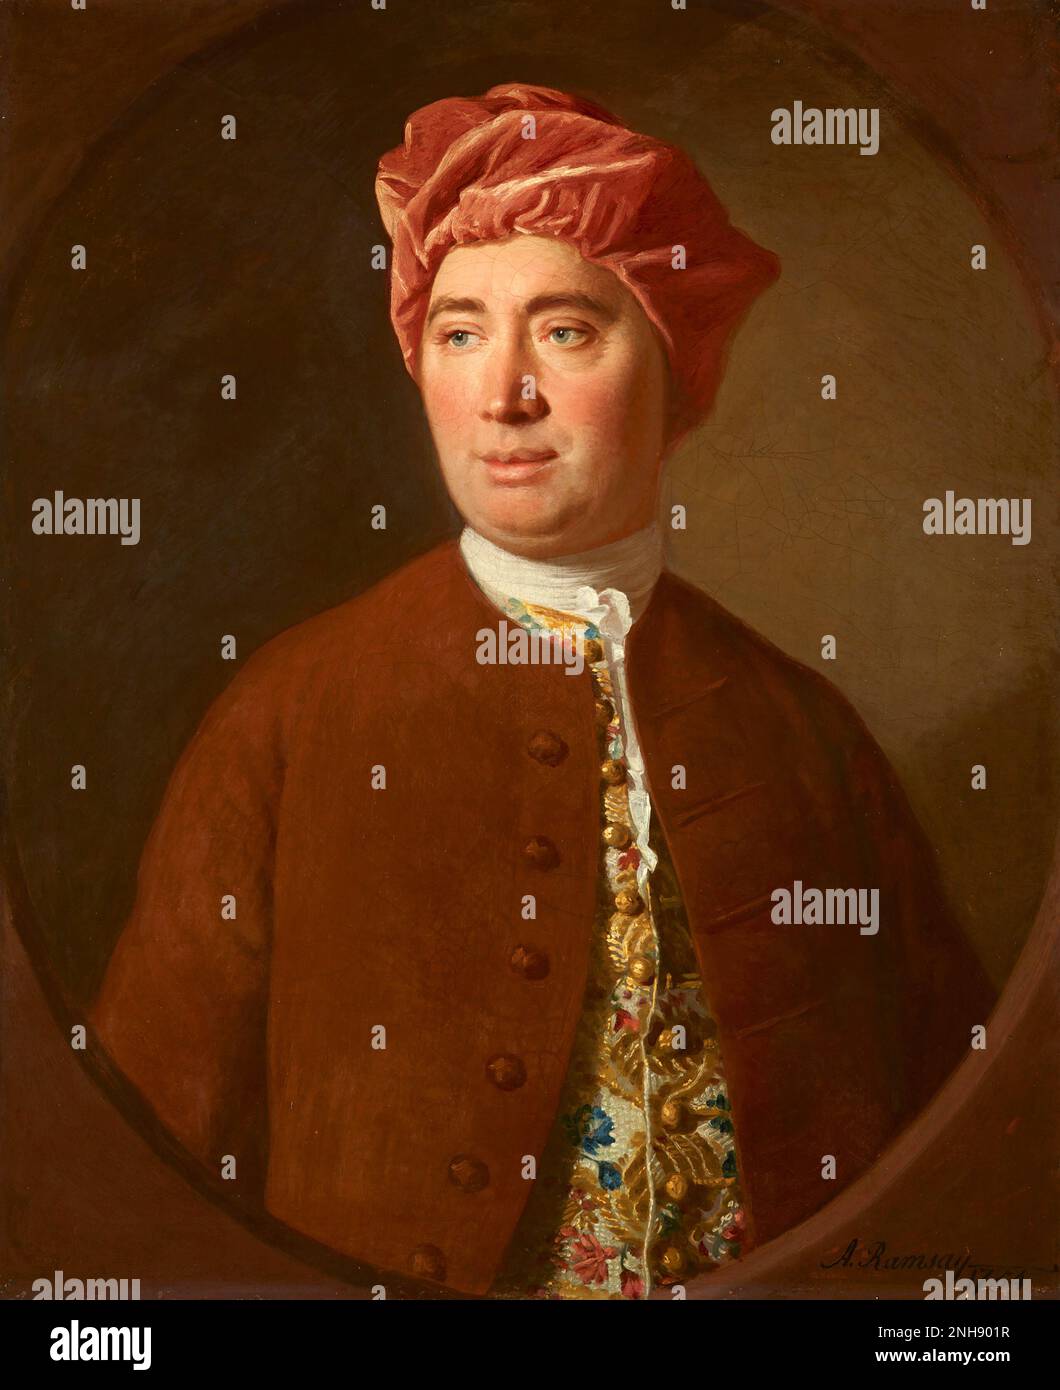 David Hume (1711-1776), Scottish Enlightenment philosopher, historian, and economist, best known for his highly influential system of philosophical empiricism, skepticism, and naturalism. Painting by Allan Ramsay  (1713-1784), 1754. Stock Photo